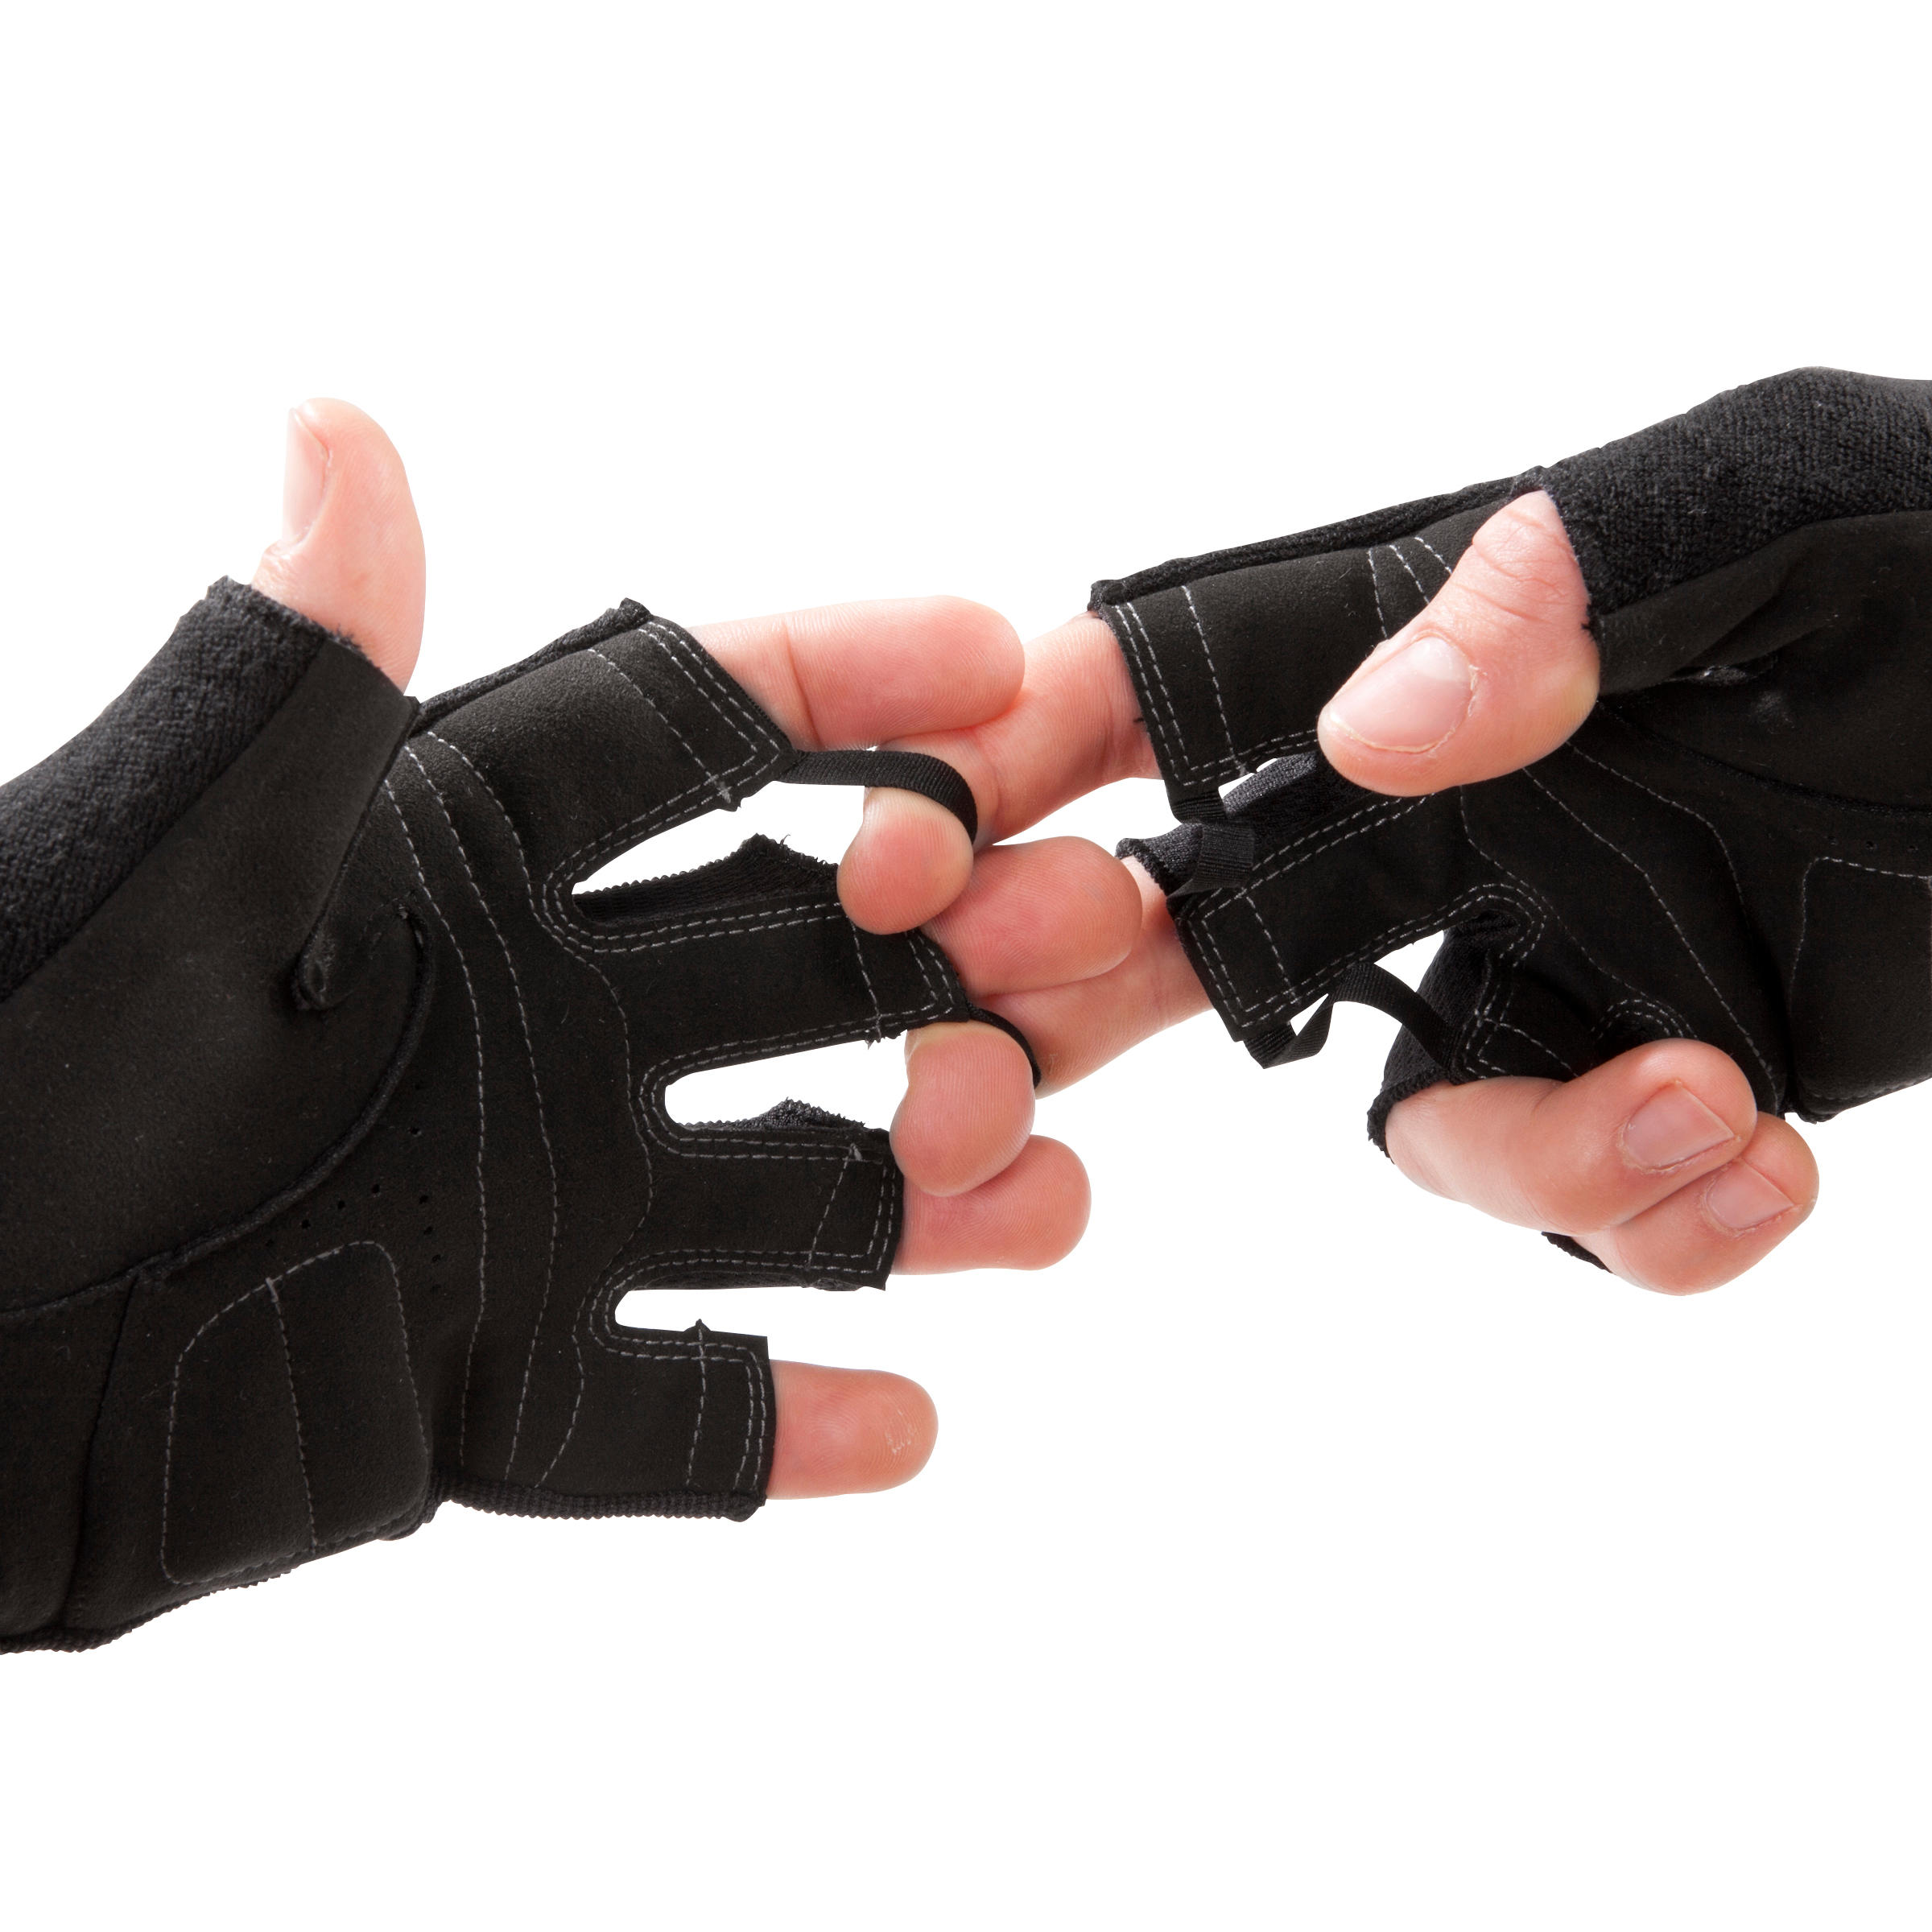 900 Weight Training Glove with Double Rip-Tab Cuff - Black/Grey 4/10